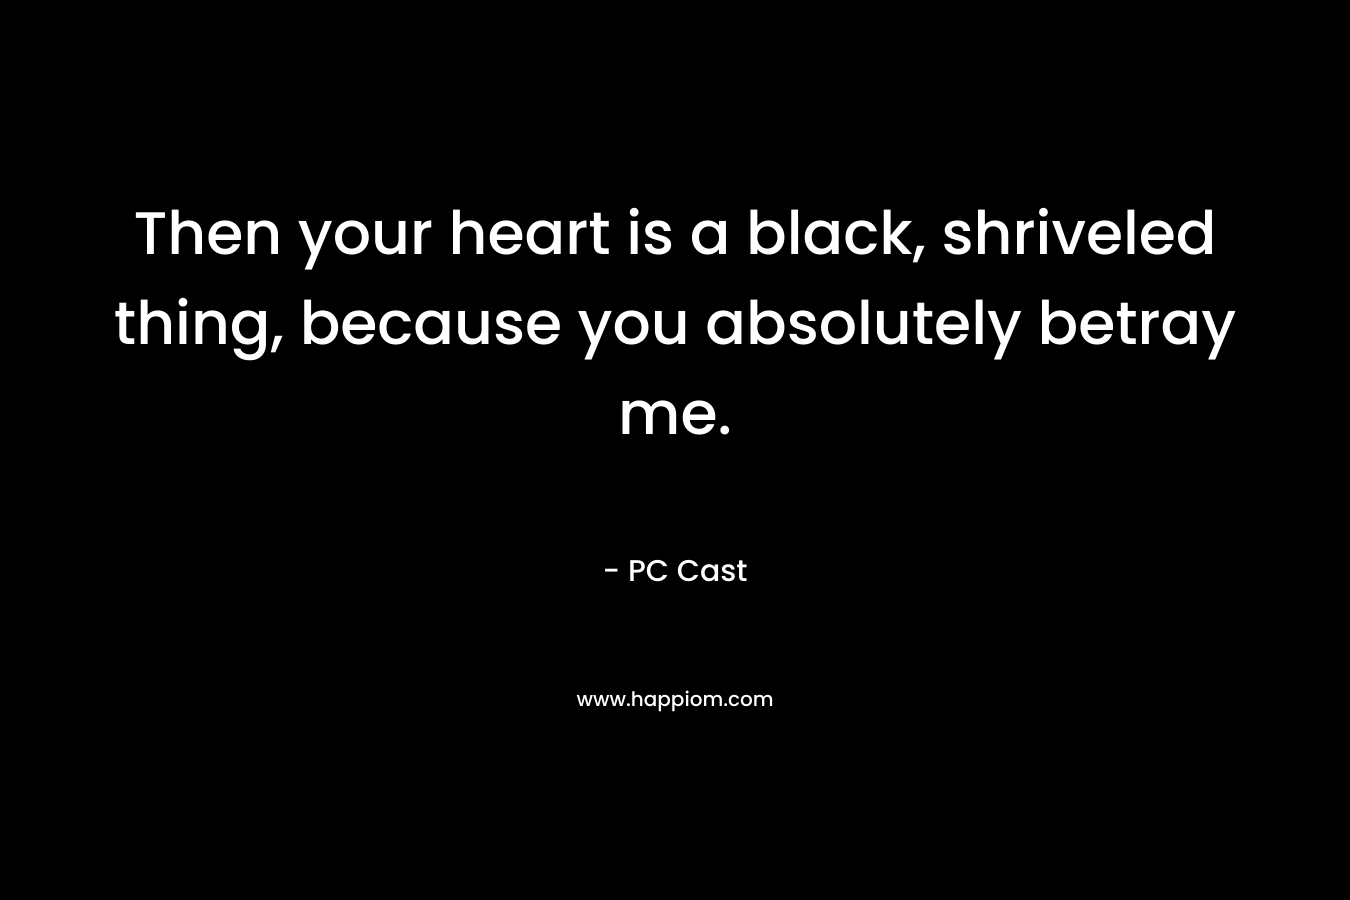 Then your heart is a black, shriveled thing, because you absolutely betray me. – PC Cast